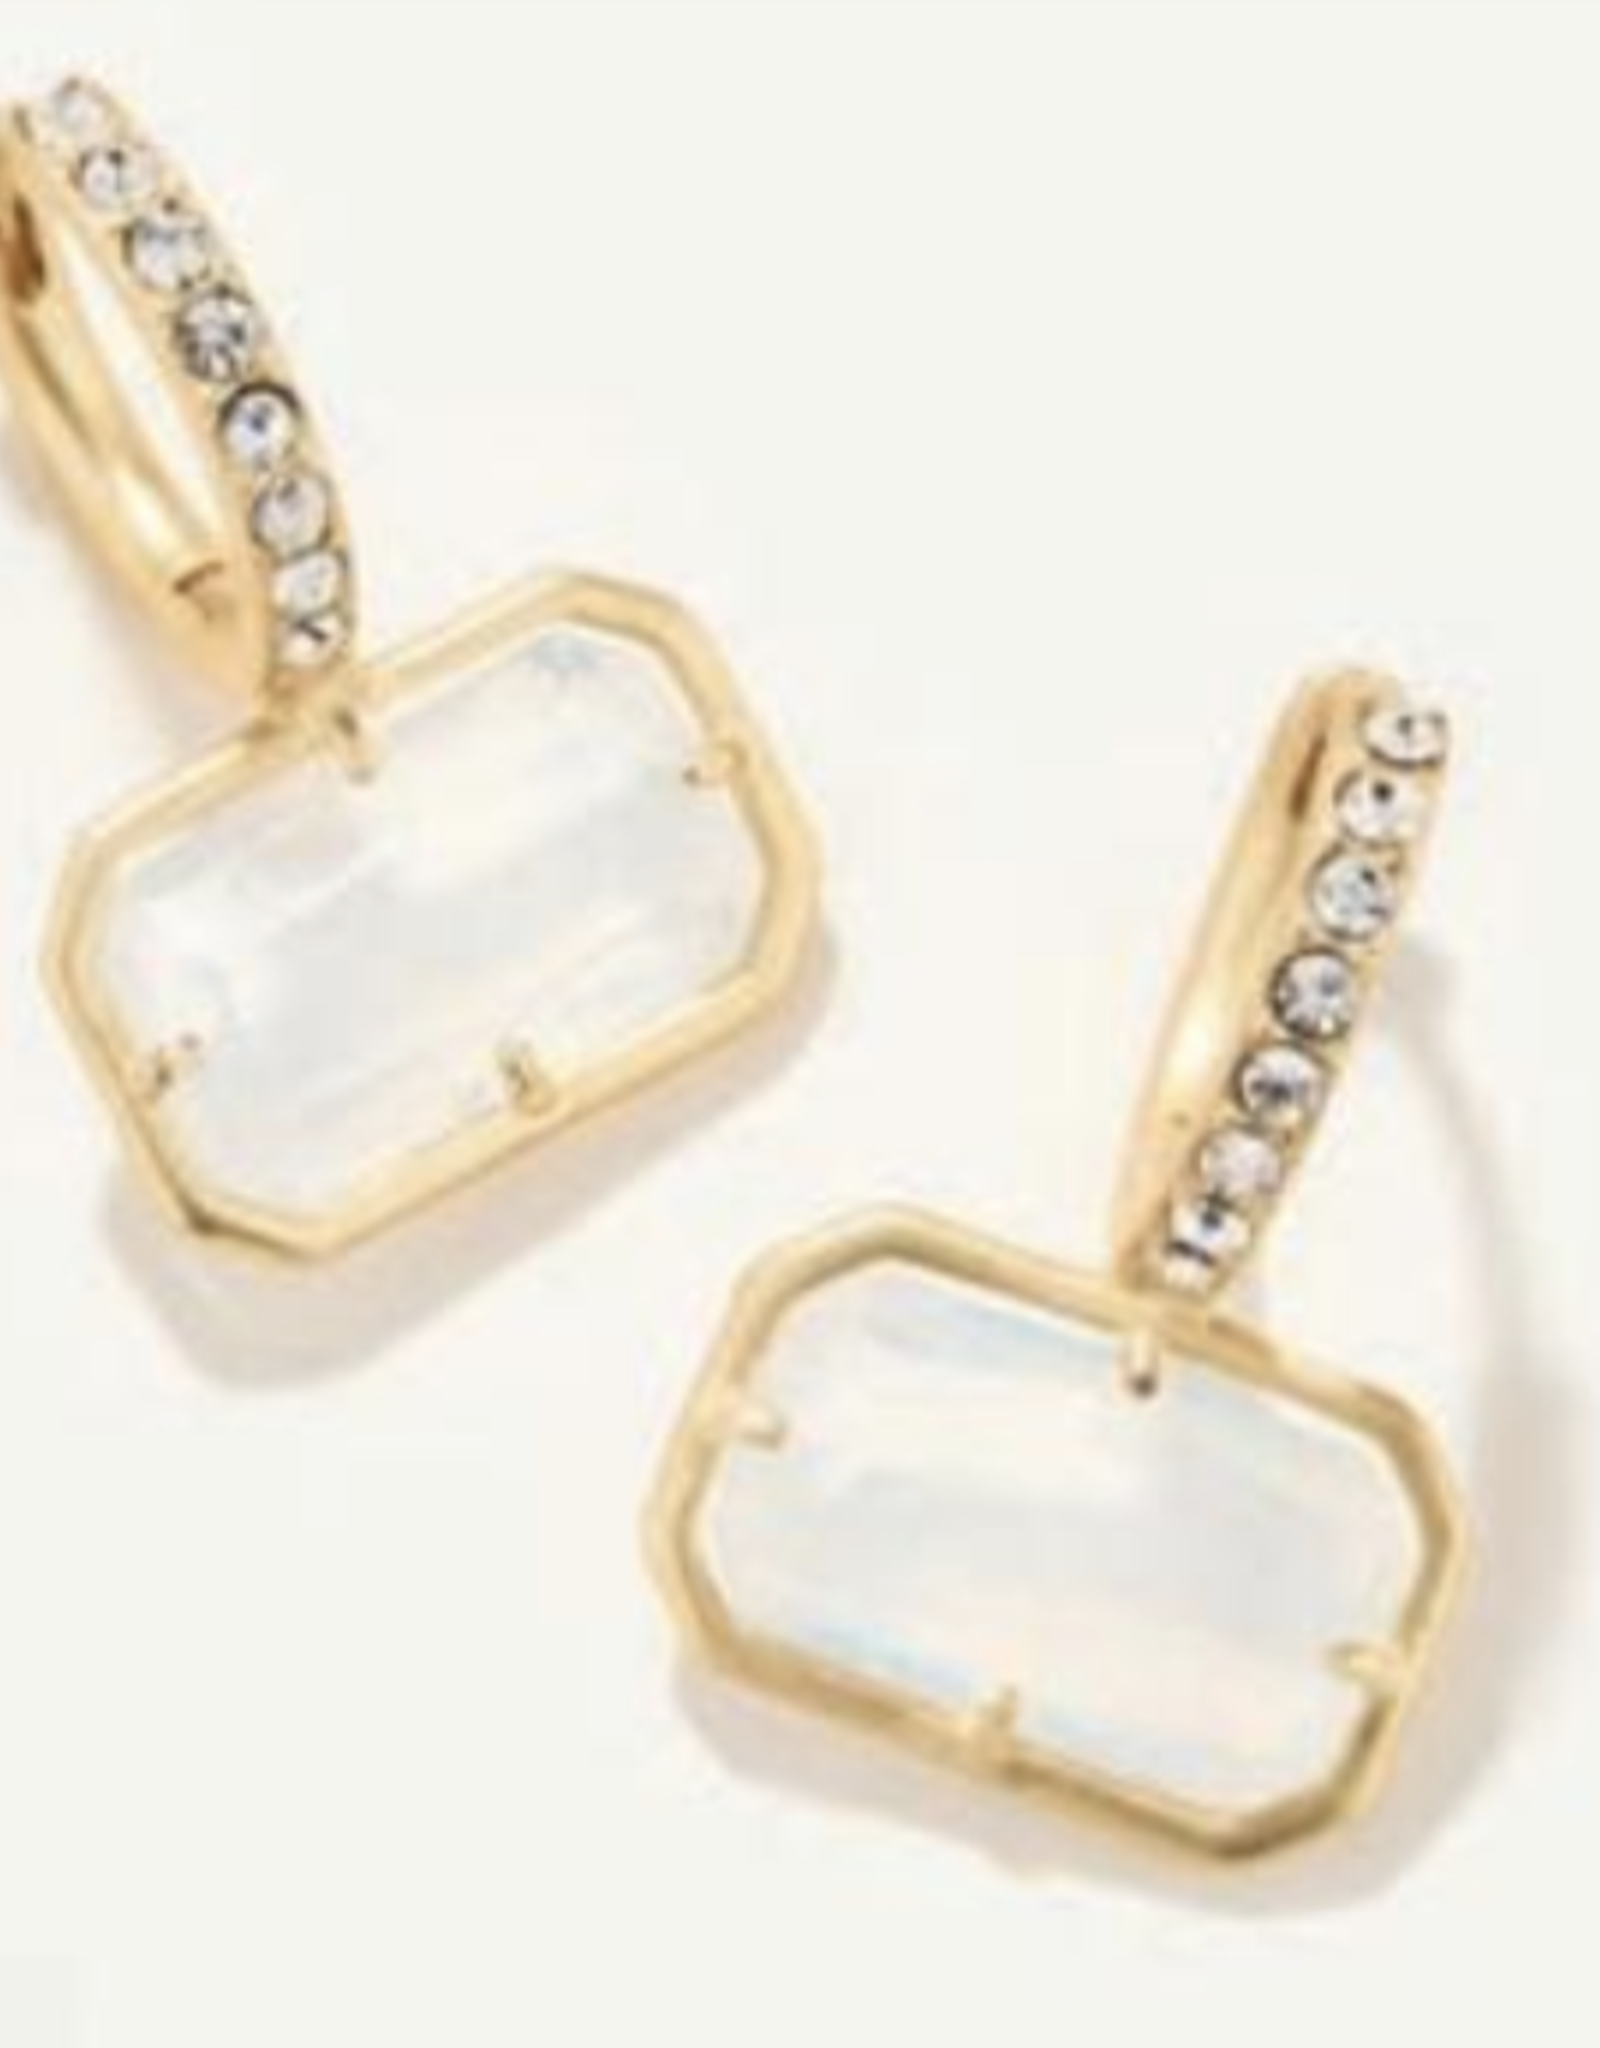 Spartina White Hall Earrings White/Crystal